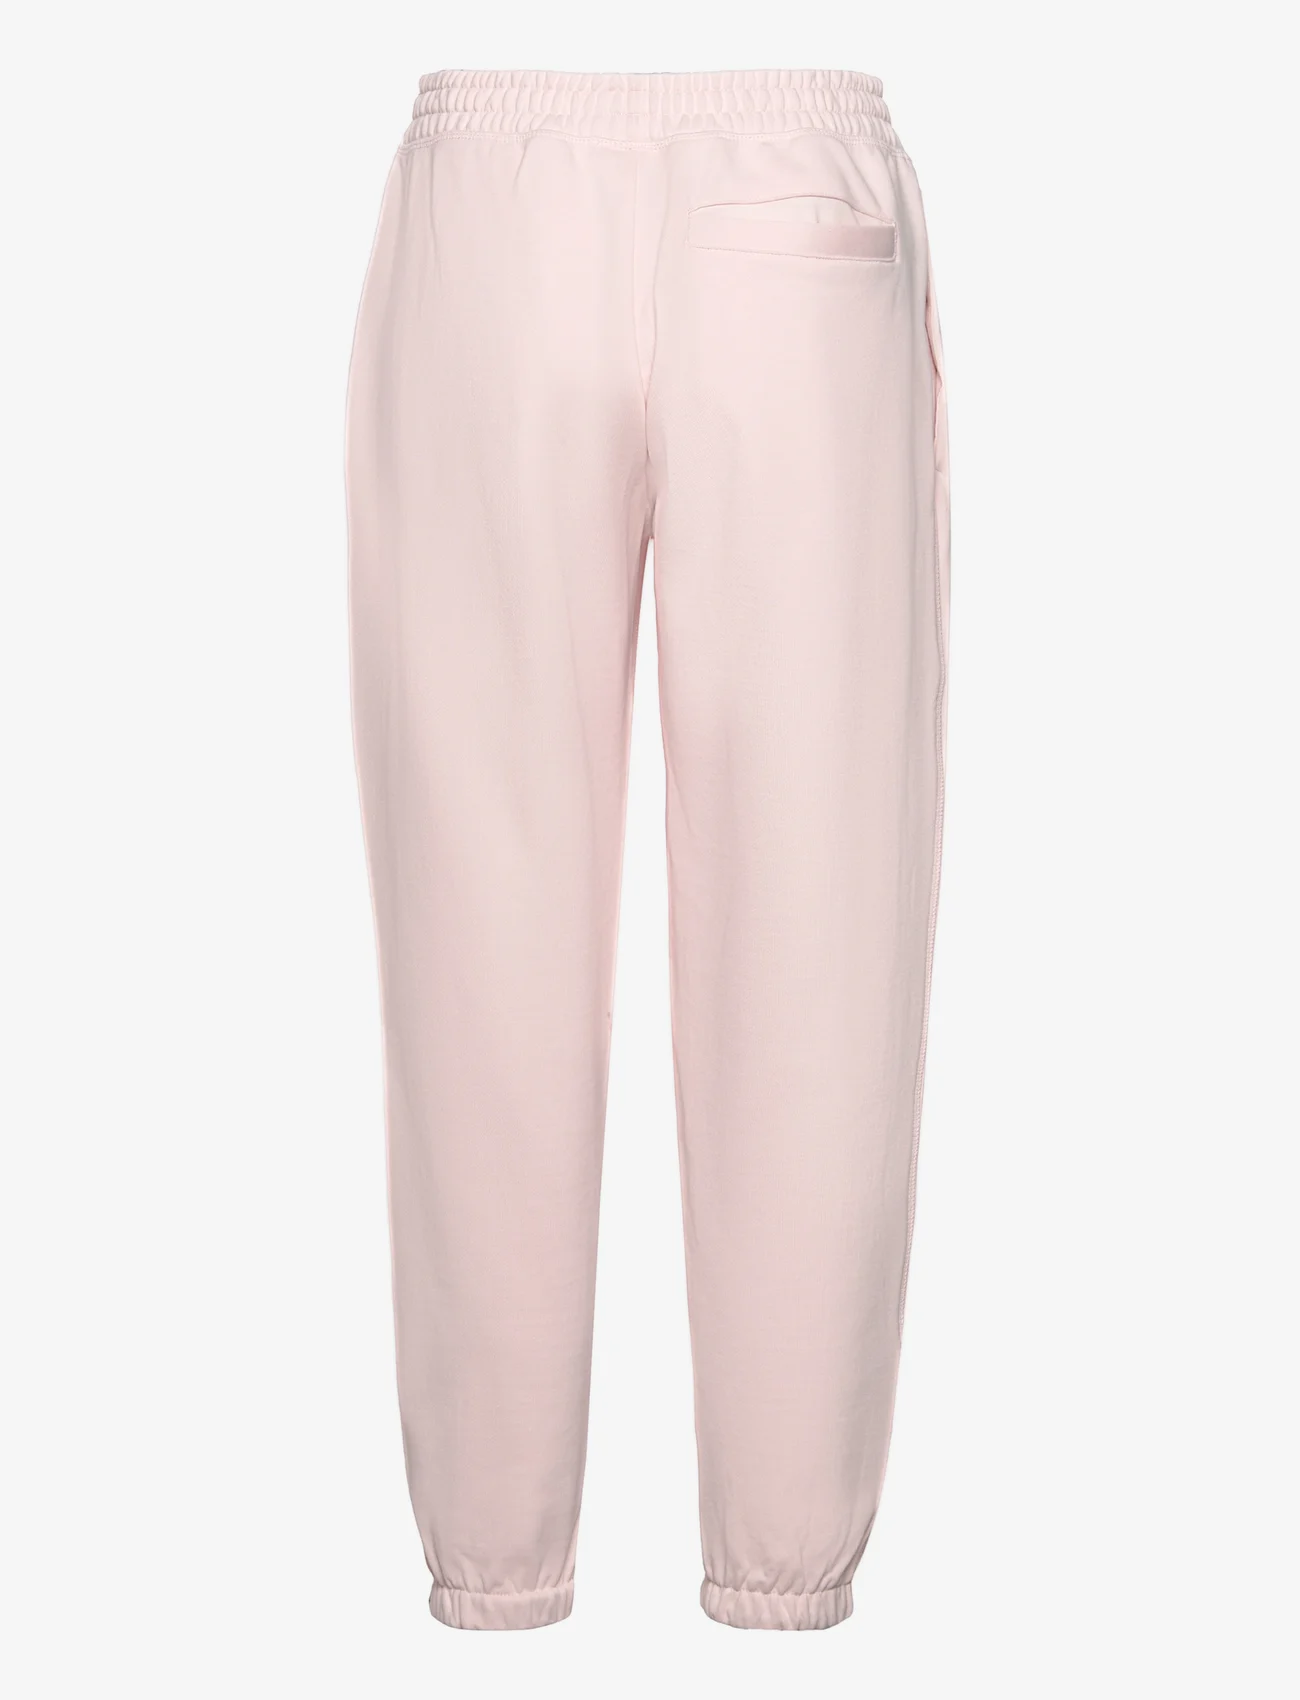 New Balance - Athletics Nature State French Terry Sweatpant - moterims - washed pink - 1